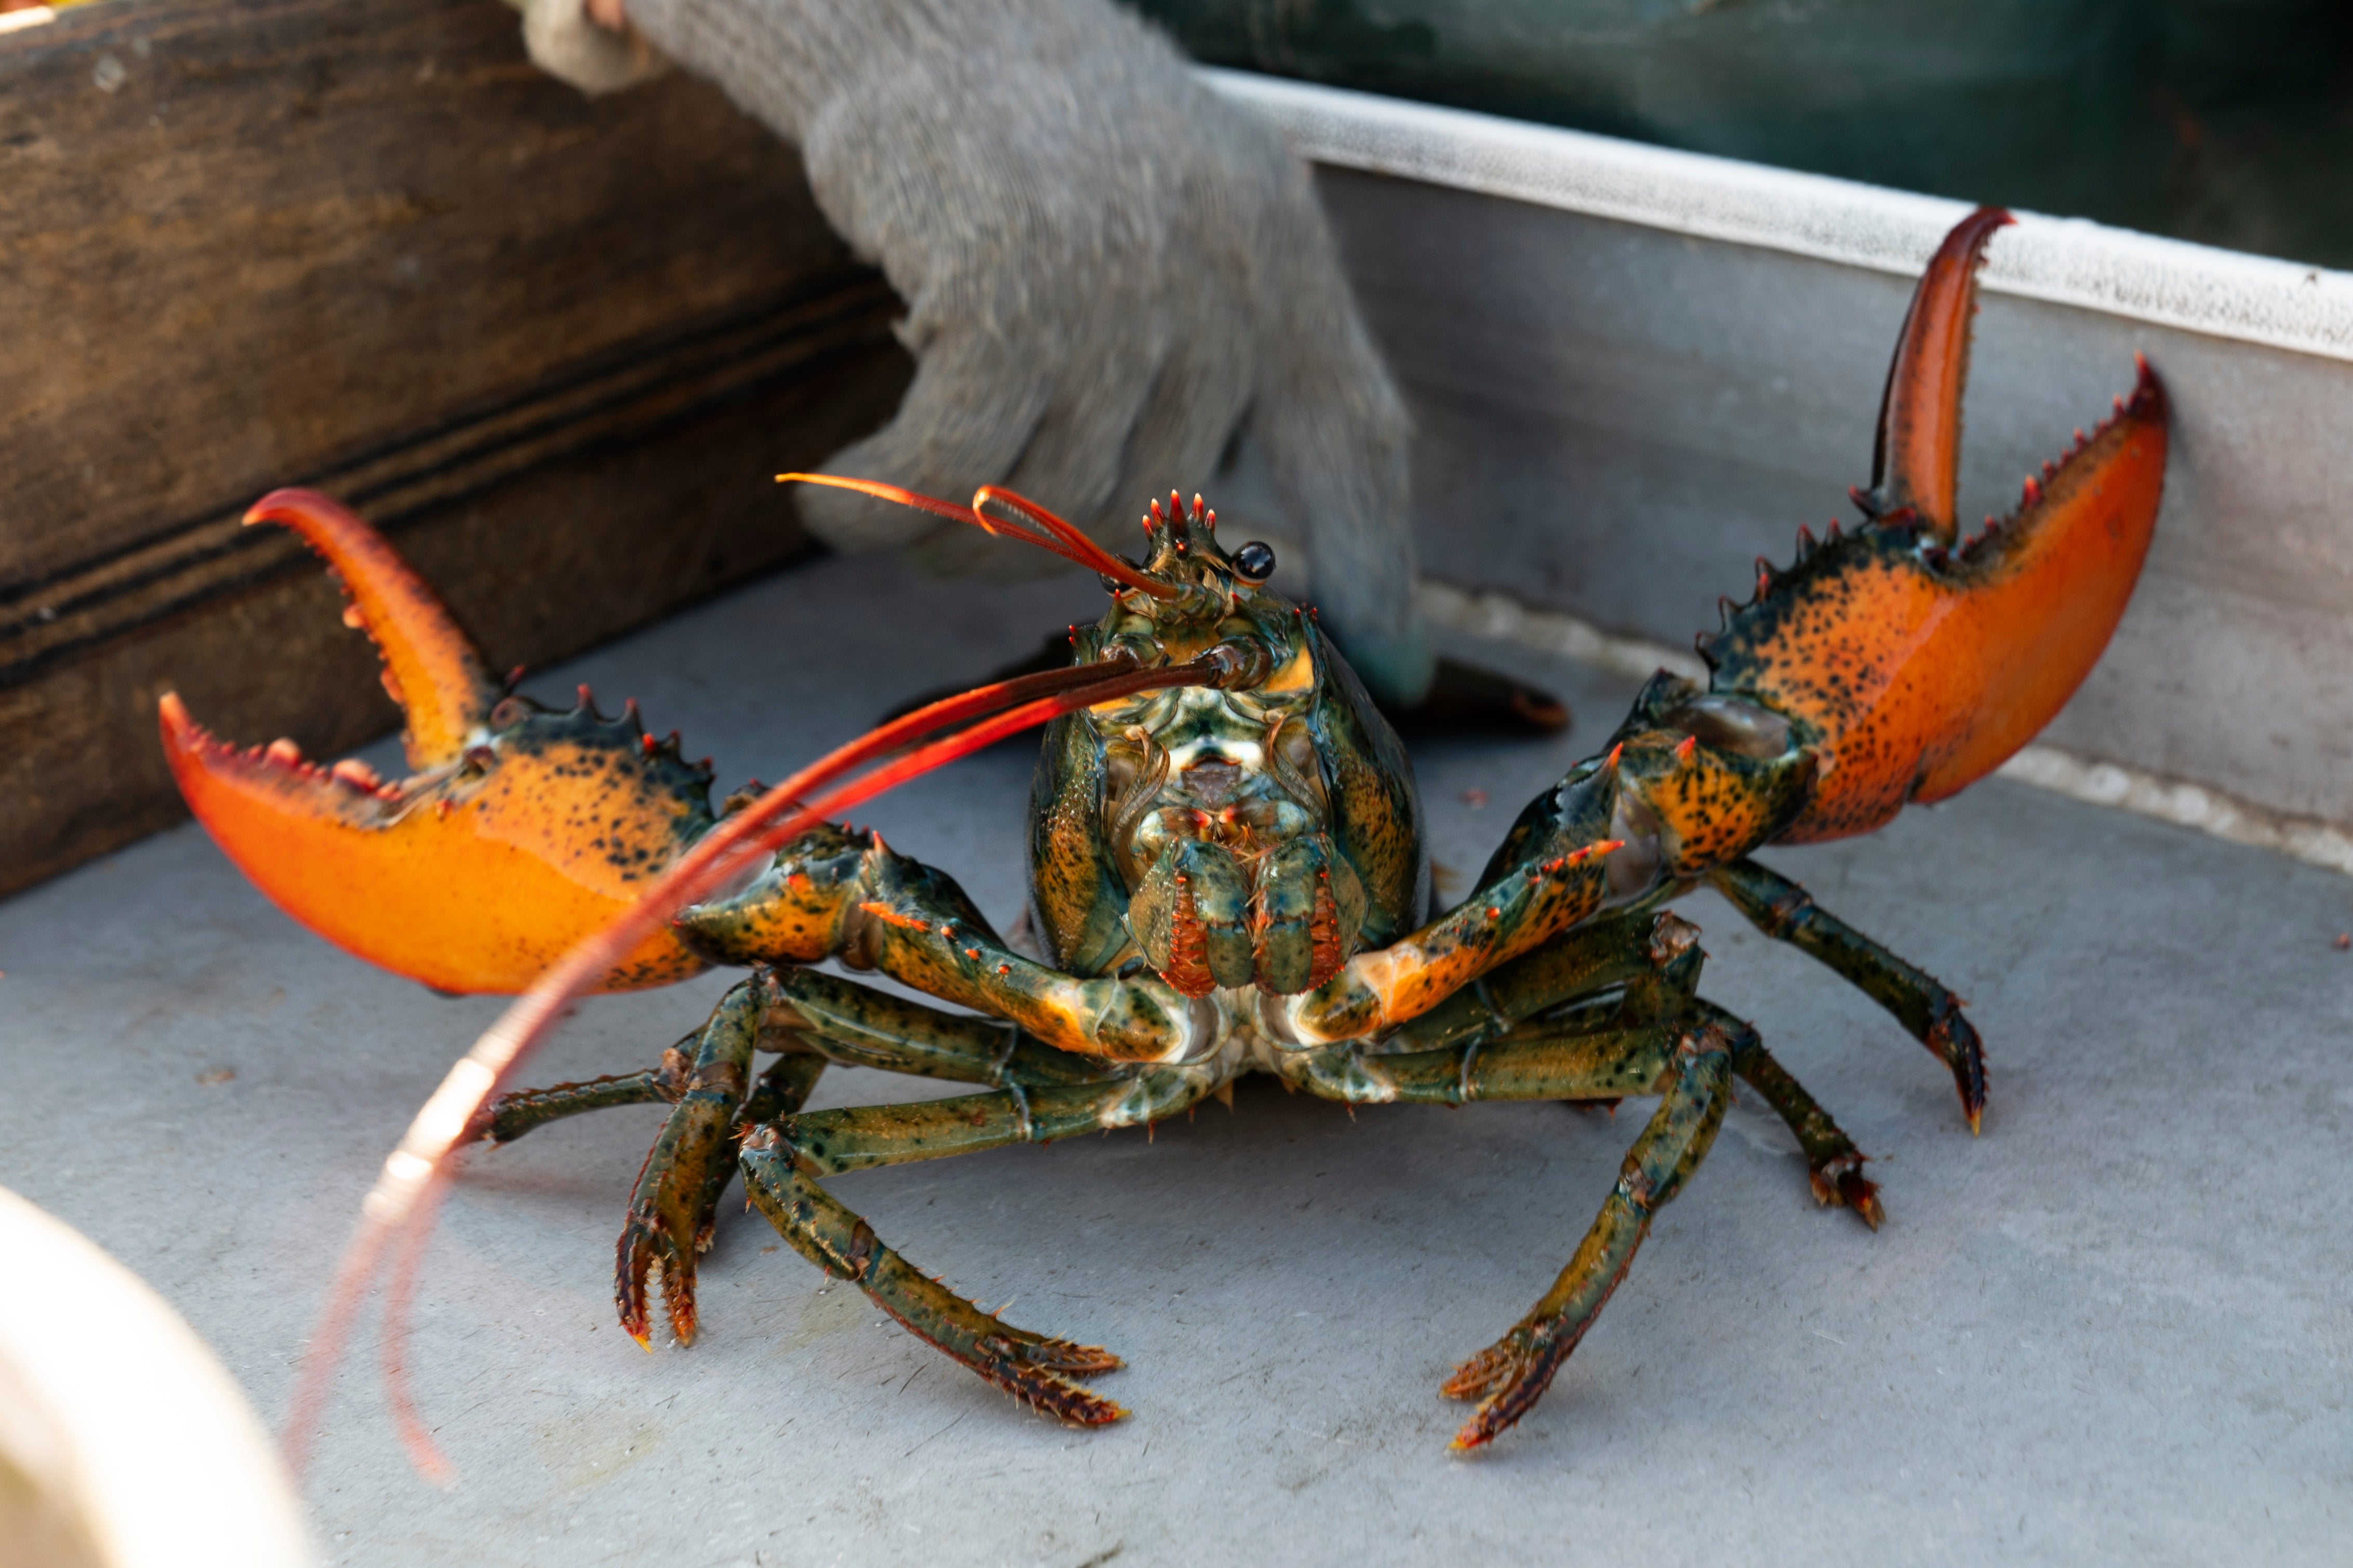 A lobster rears its claws